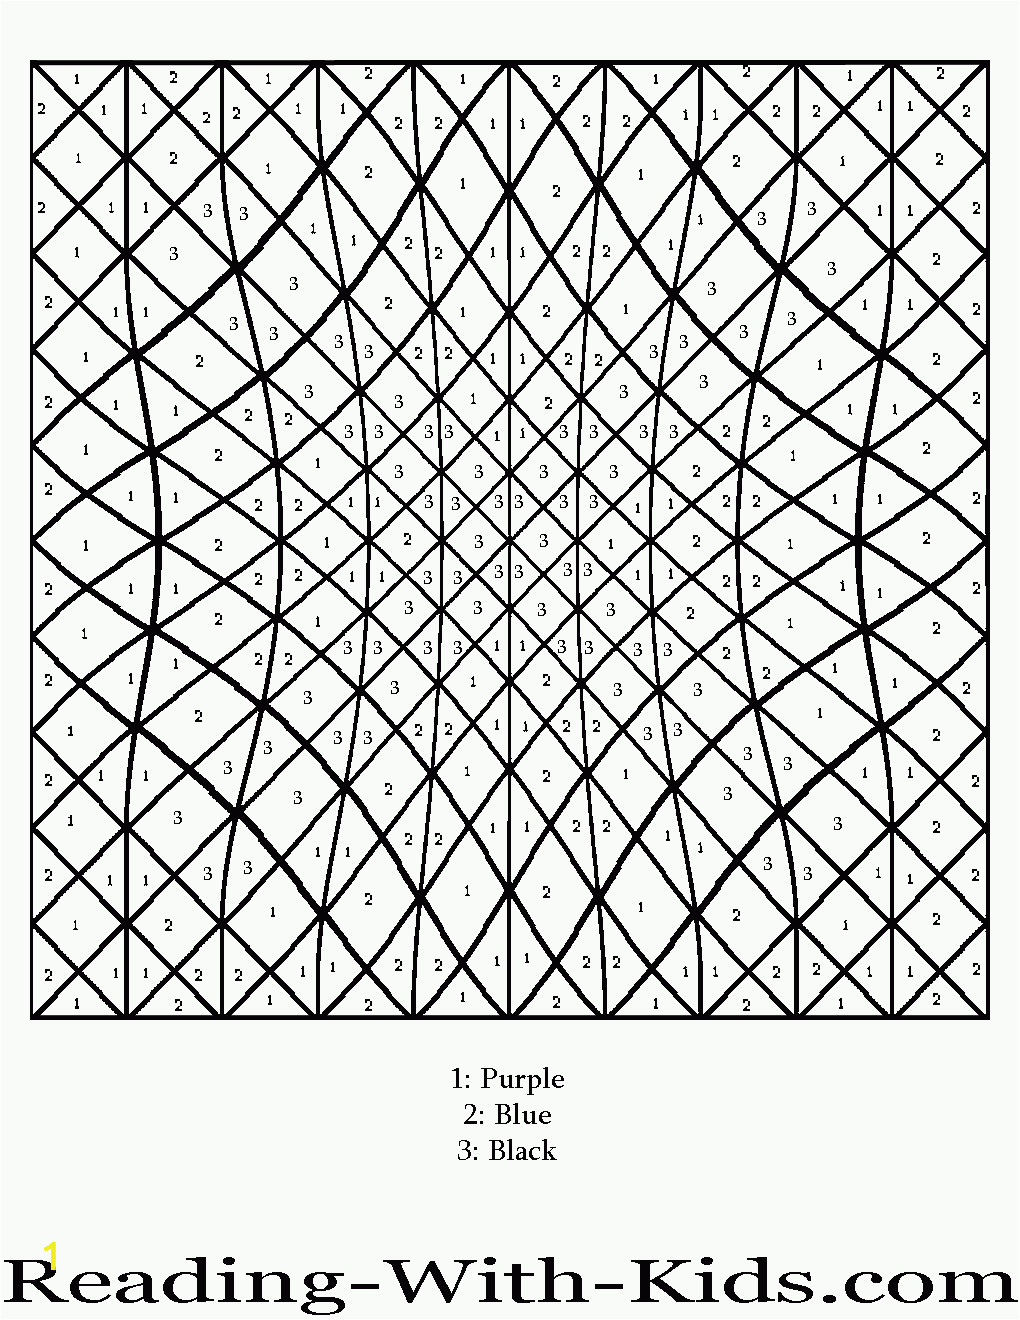 Coloring Pages Color by Number Hard Difficult Color by Number Printables Coloring Home